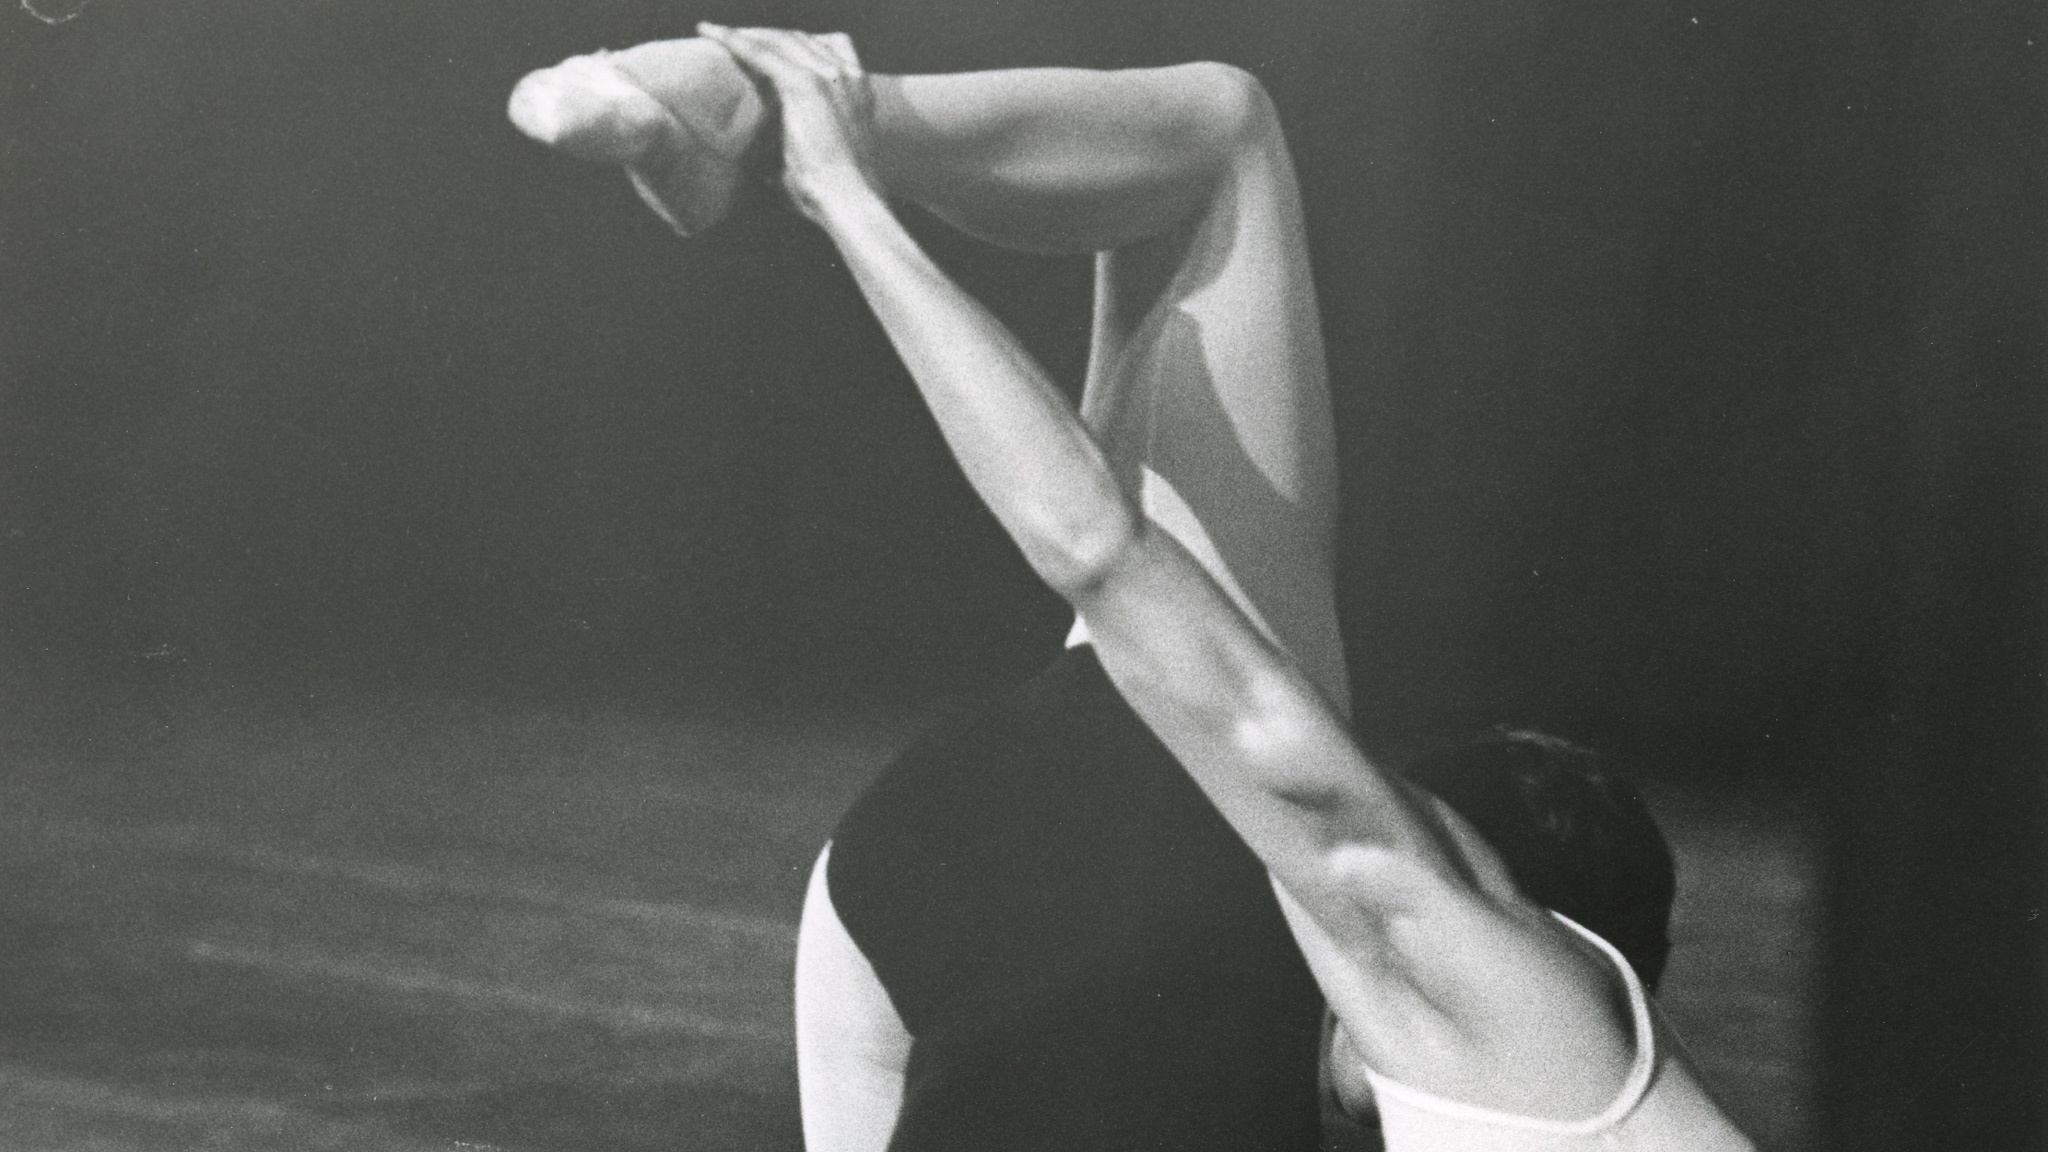 A black and white photograph of two ballet dancers, one balanced with body upside down and back to the camera, the other provides support at the head and raised foot.